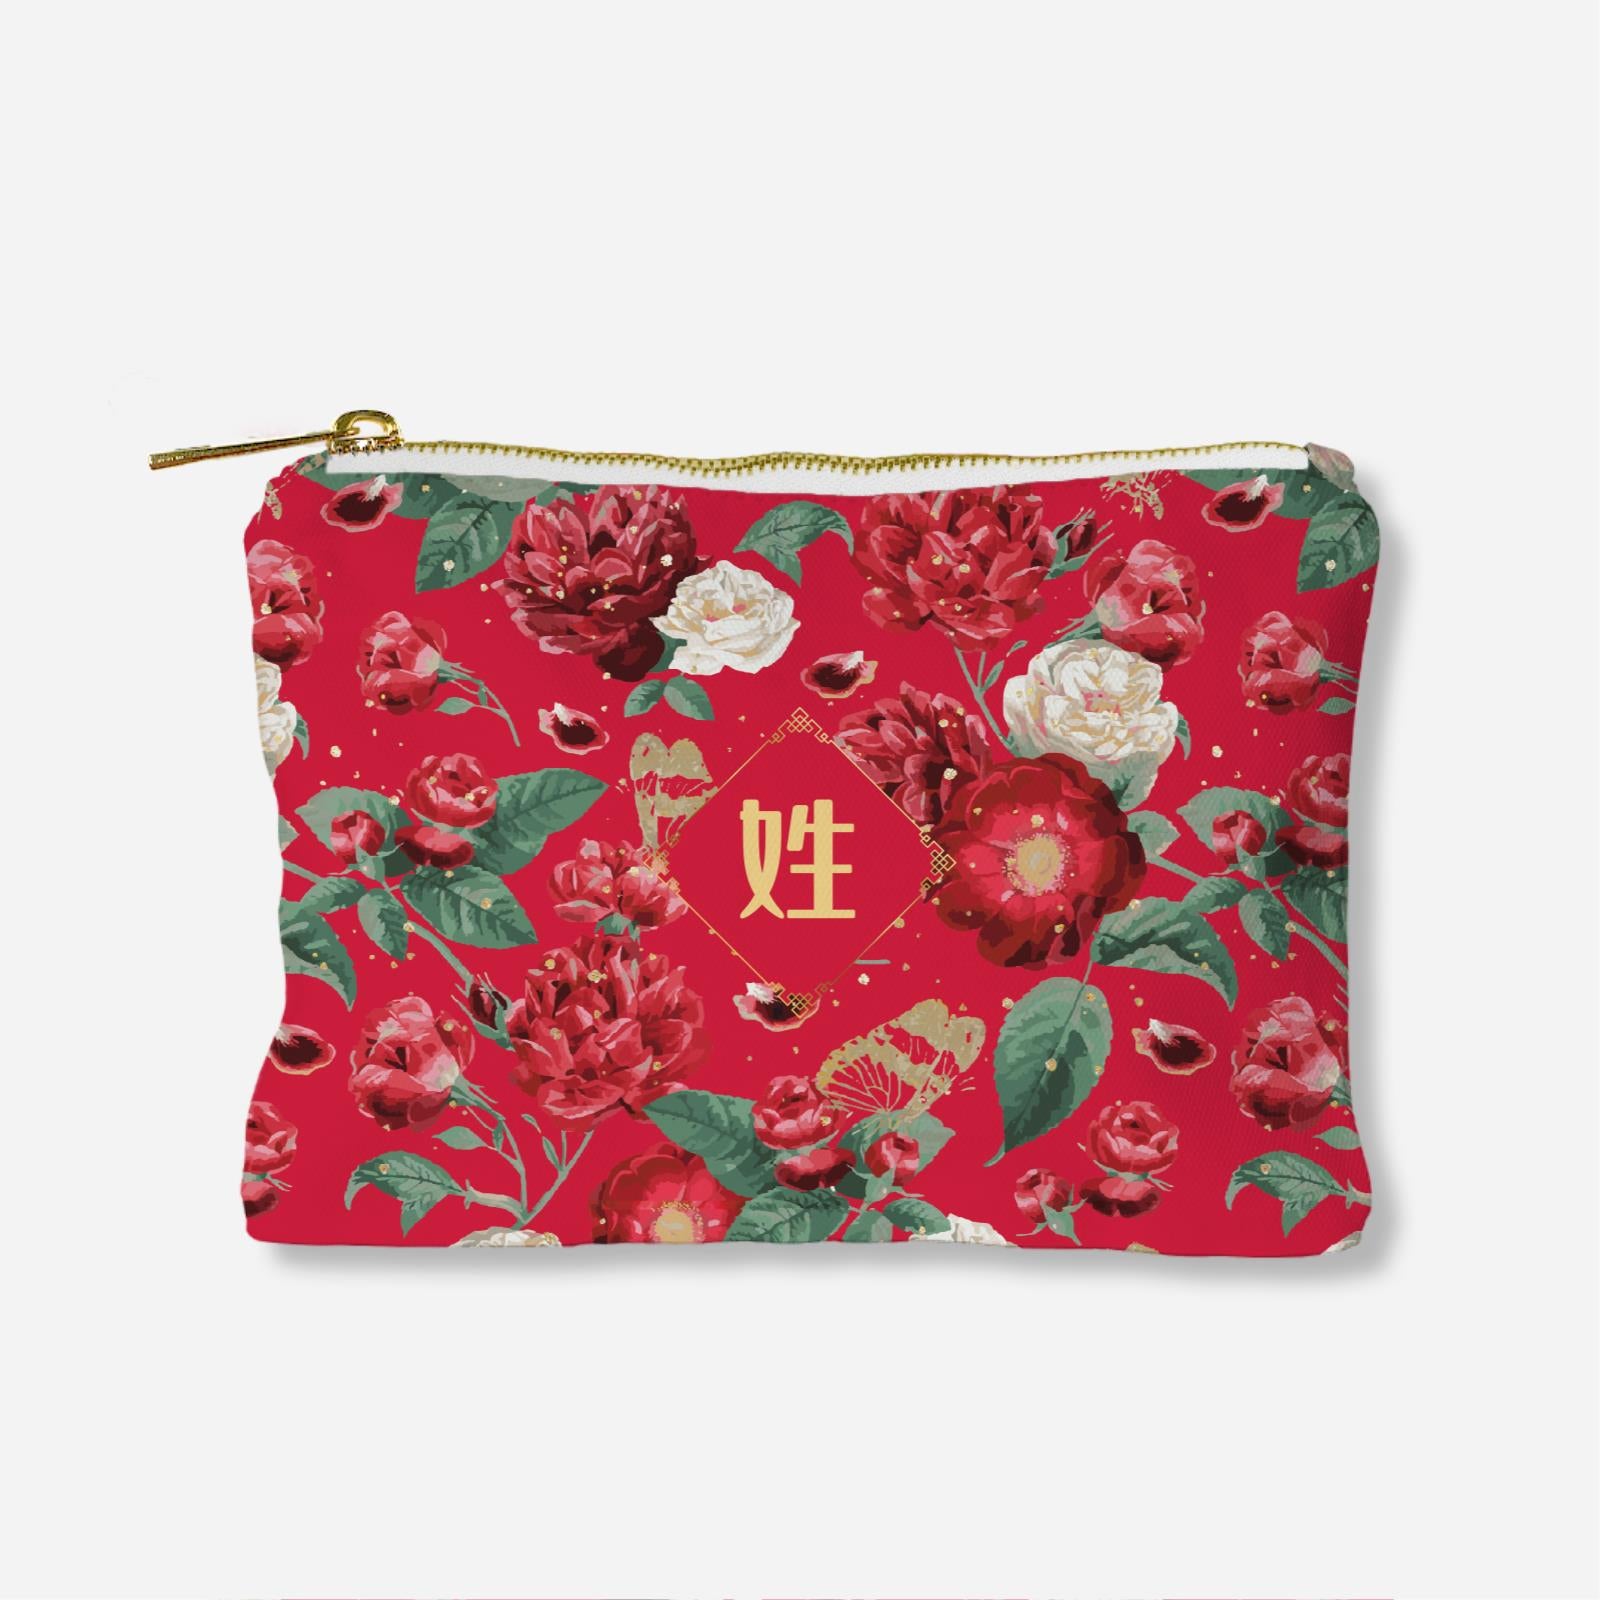 Royal Floral - Red Full Print Zipper Pouch With Chinese Personalization